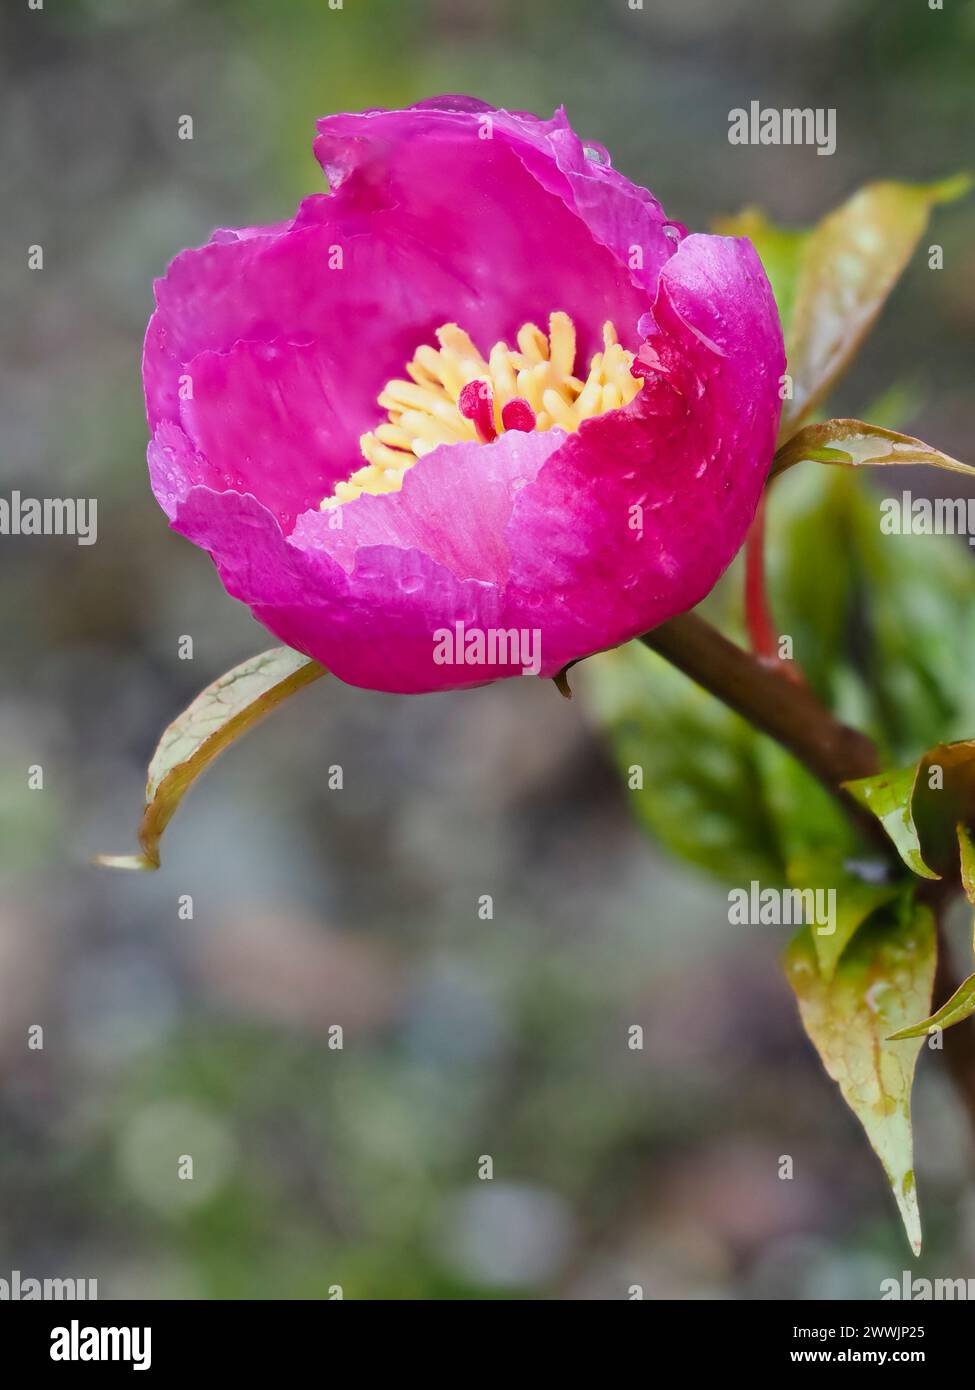 Early spring flower of the hardy perennial species peony, Paeonia mairei Stock Photo